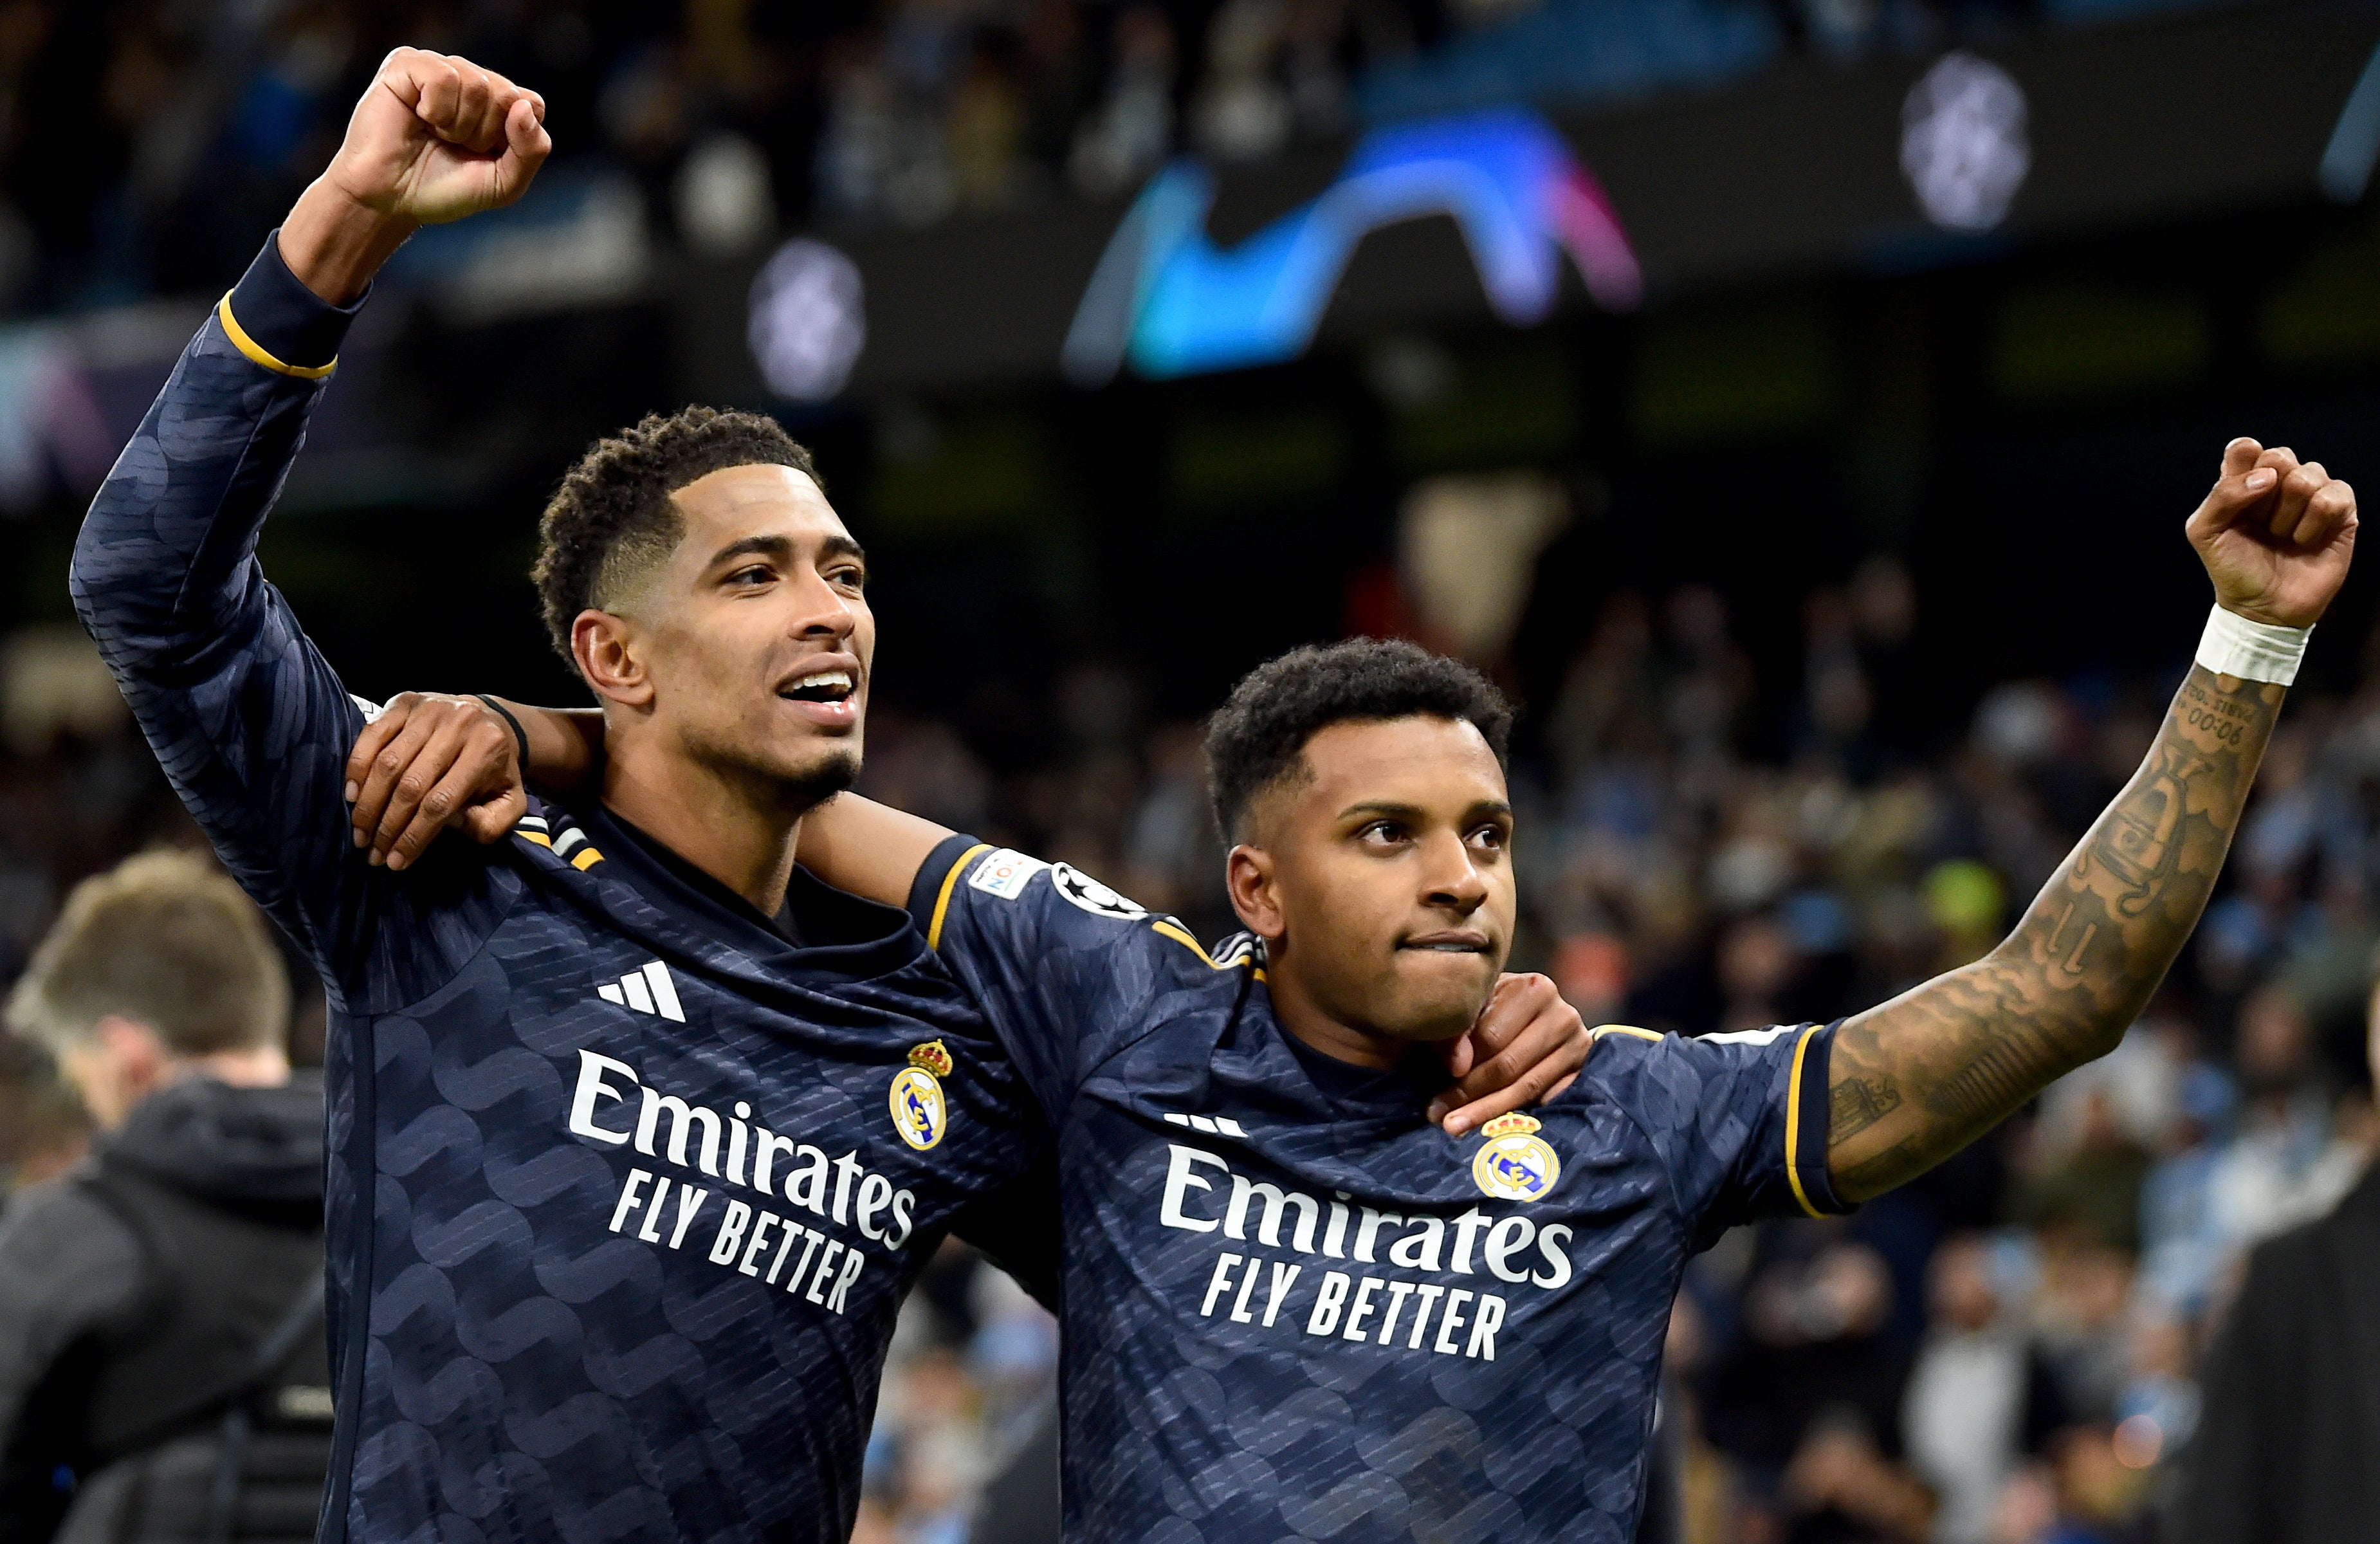 Jude Bellingham and Rodrygo helped Real Madrid overcome Man City